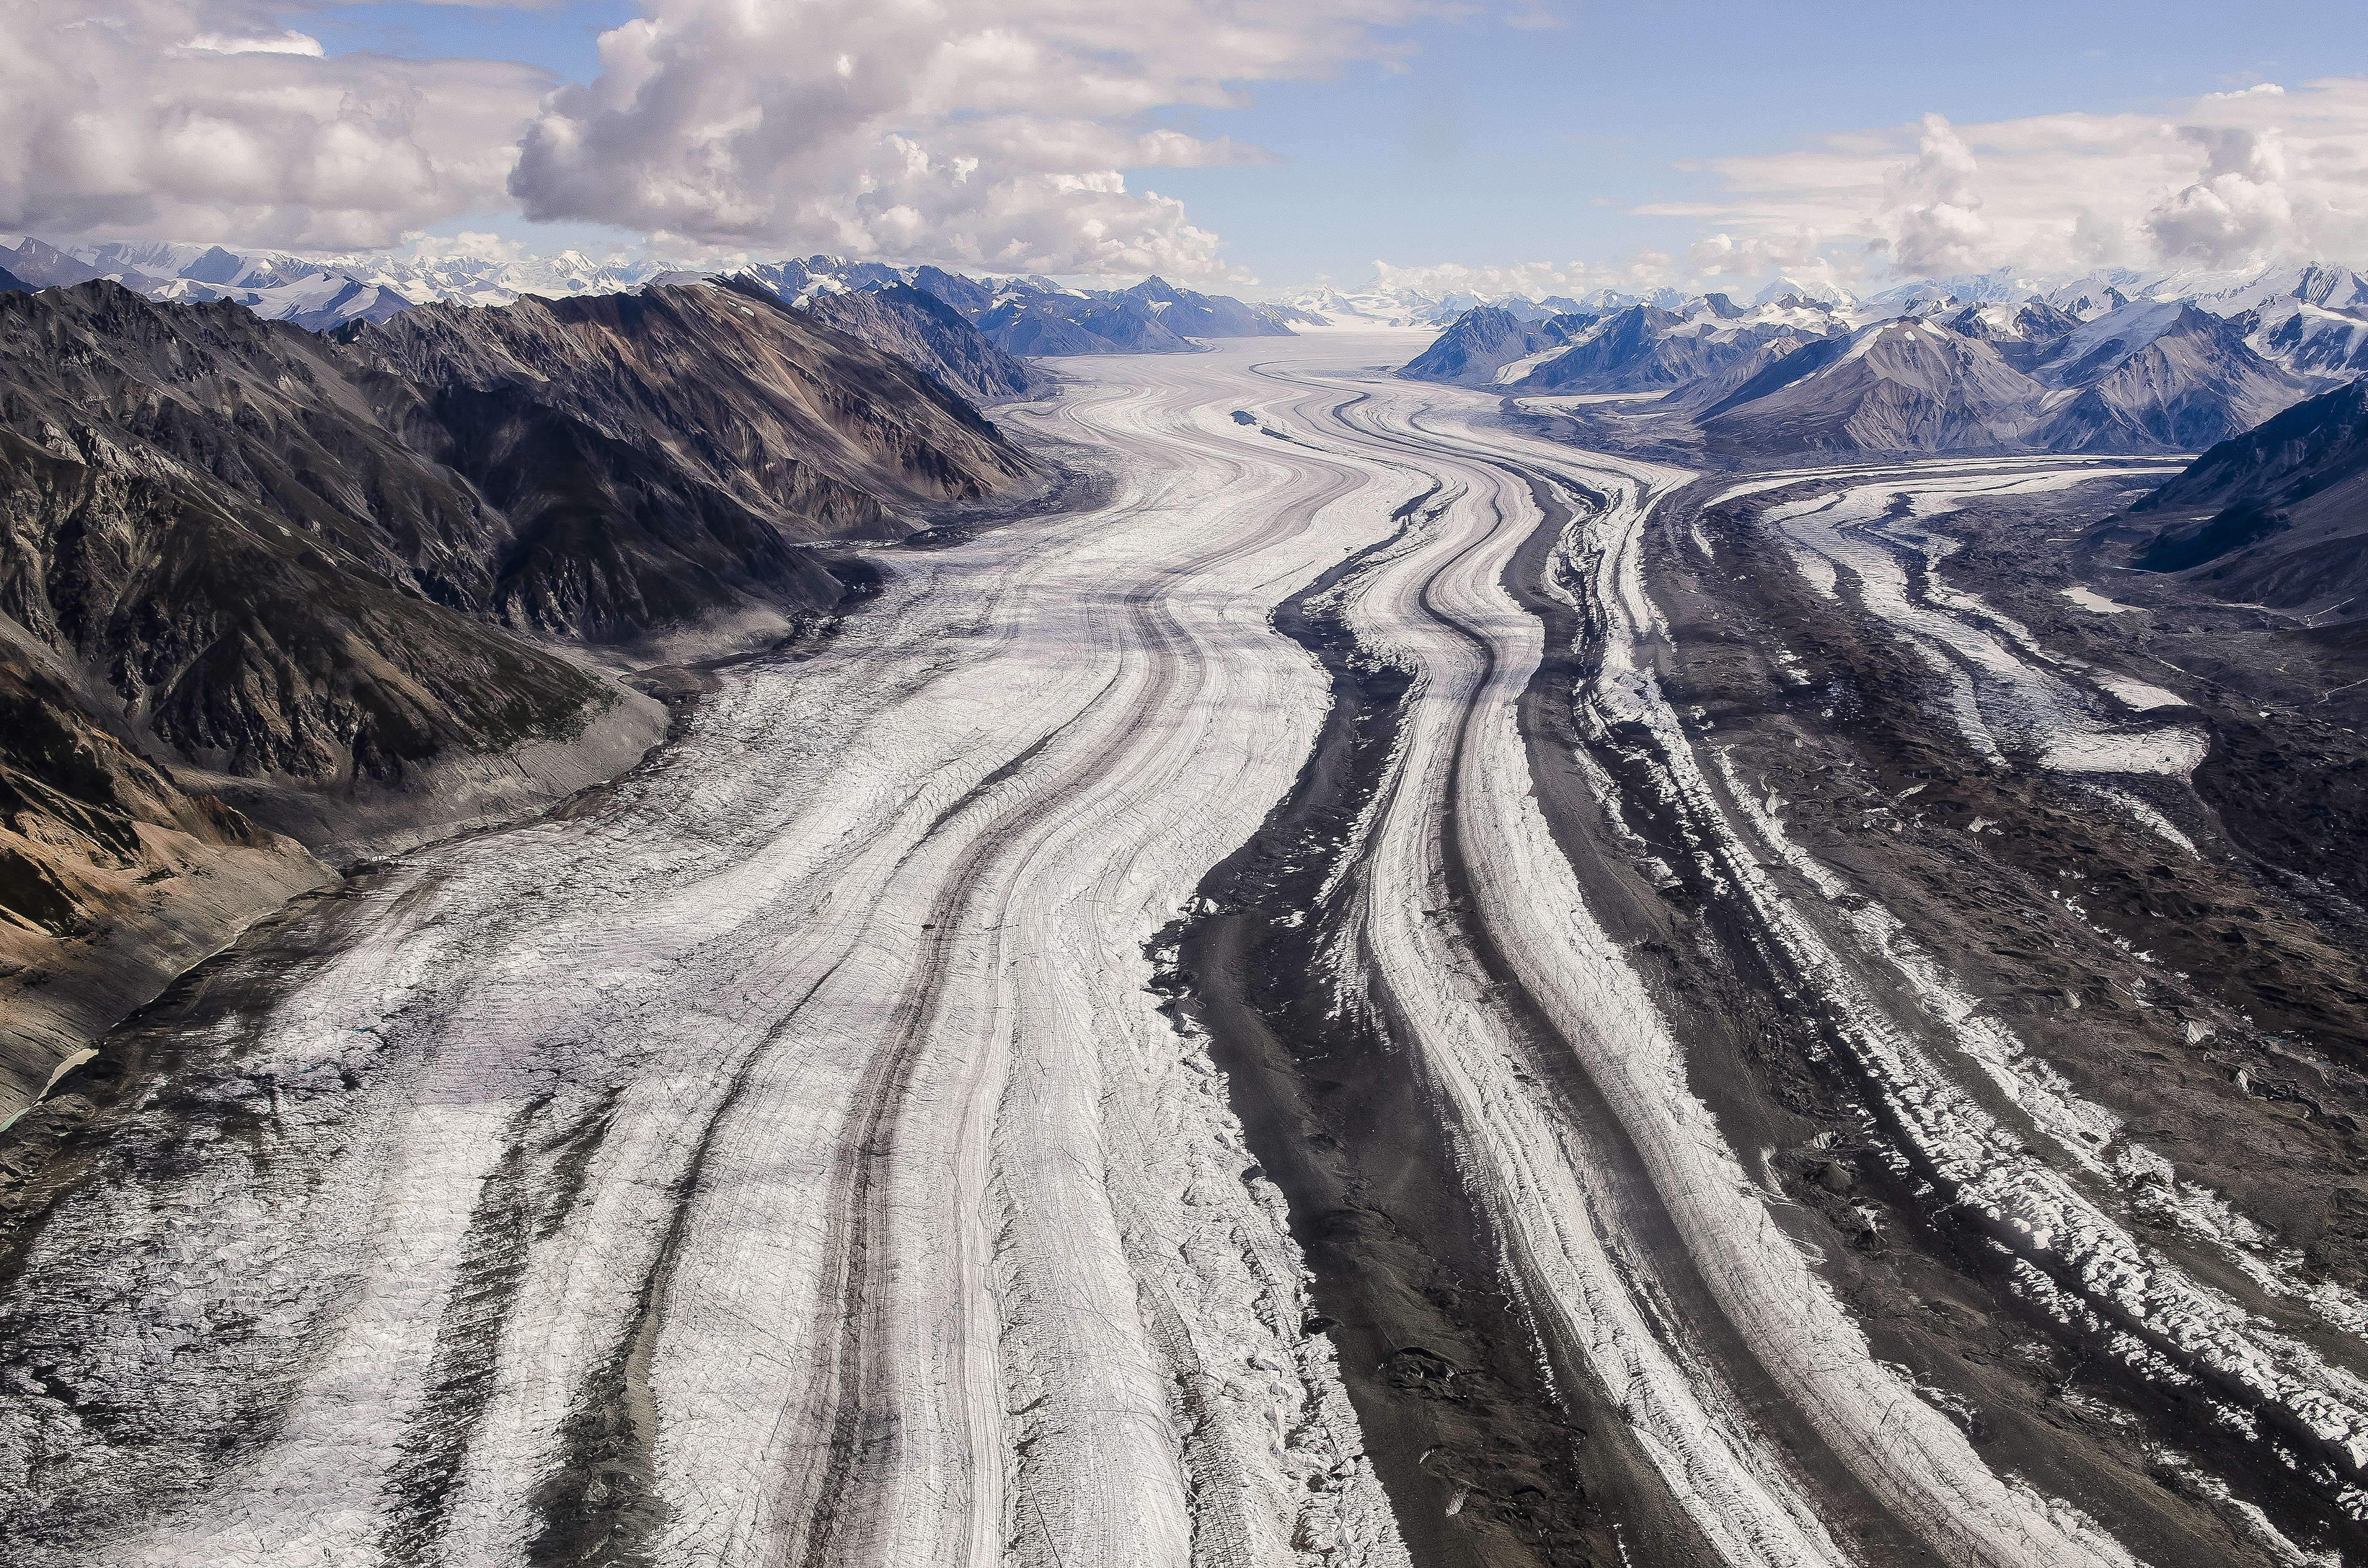 A large glacier with stripes of different colored rock nestled in between barren mountain slopes.